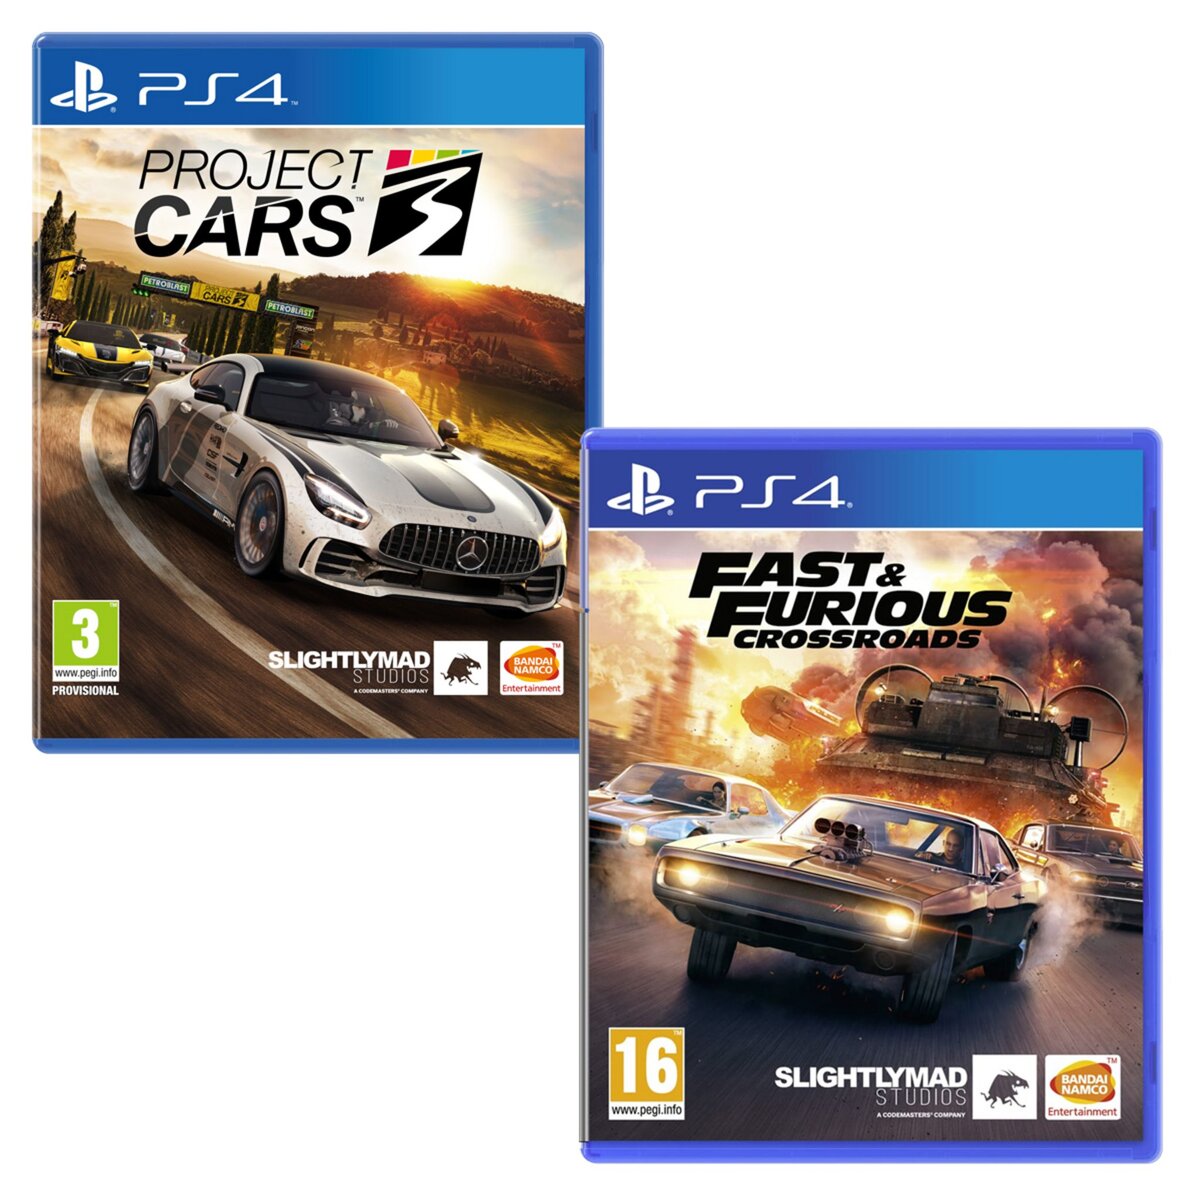 Namco Project Cars 3 PS4 + Fast & Furious Crossroads PS4